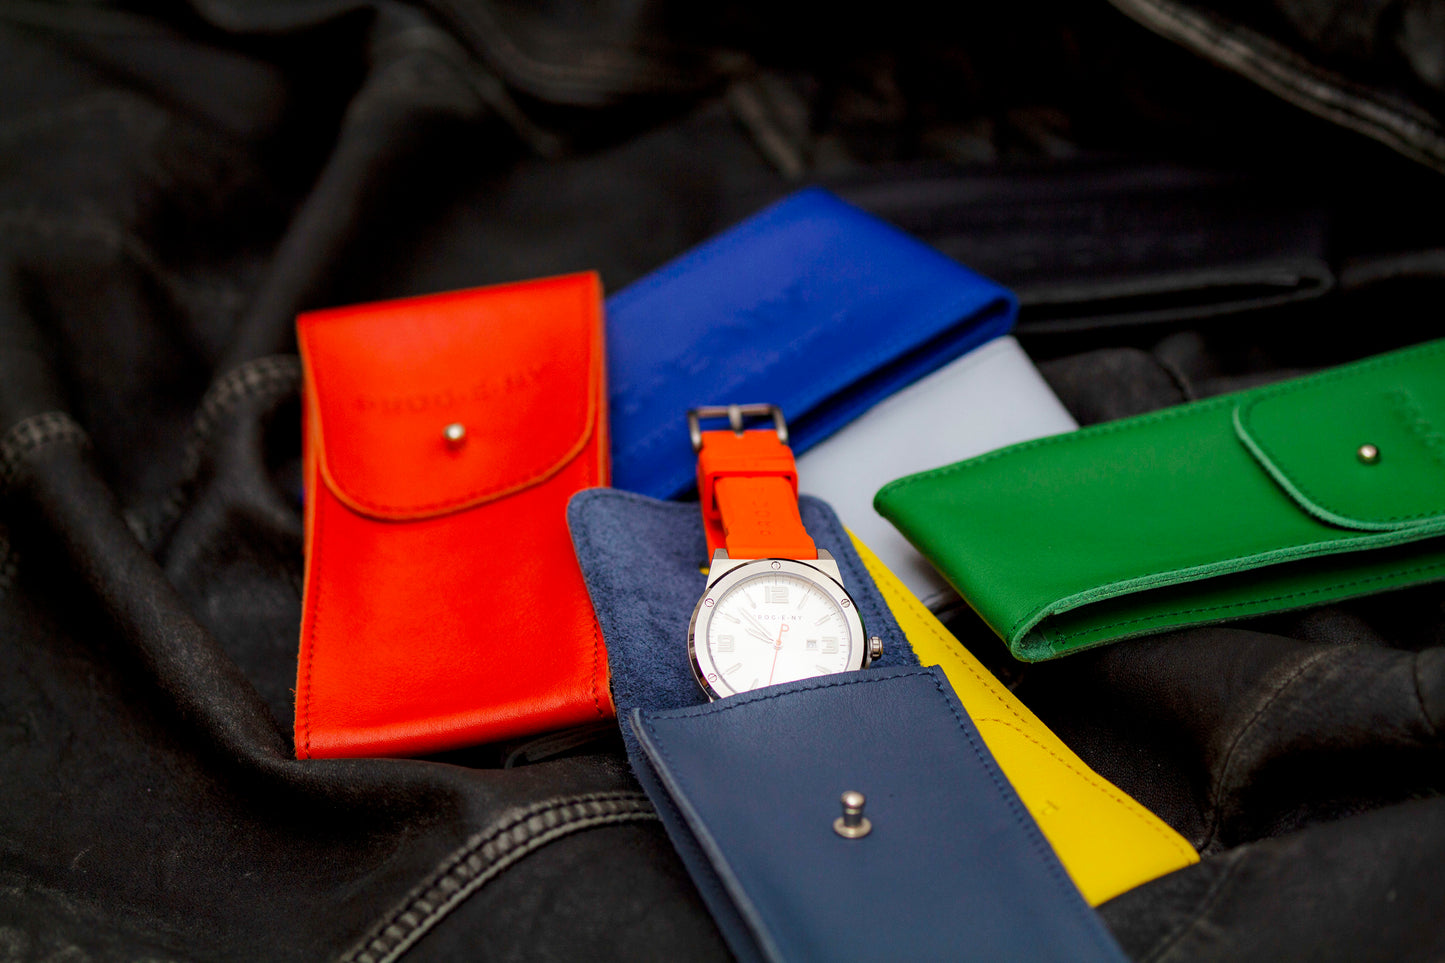 Watch Pouch - Nappa Leather